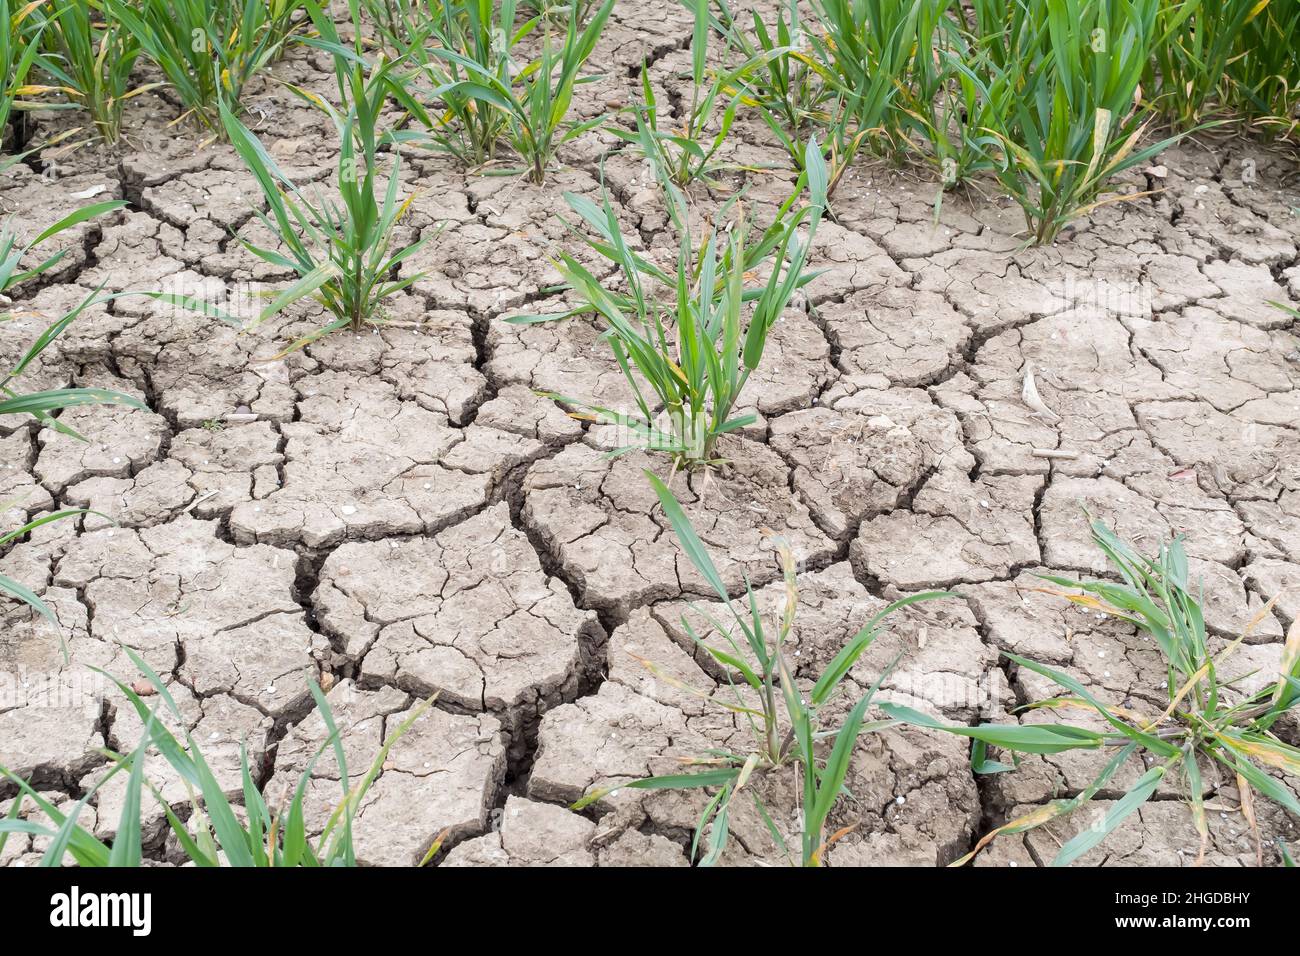 Drought on a UK farm, dry cracked earth, cracks in mud in a field of crops Stock Photo